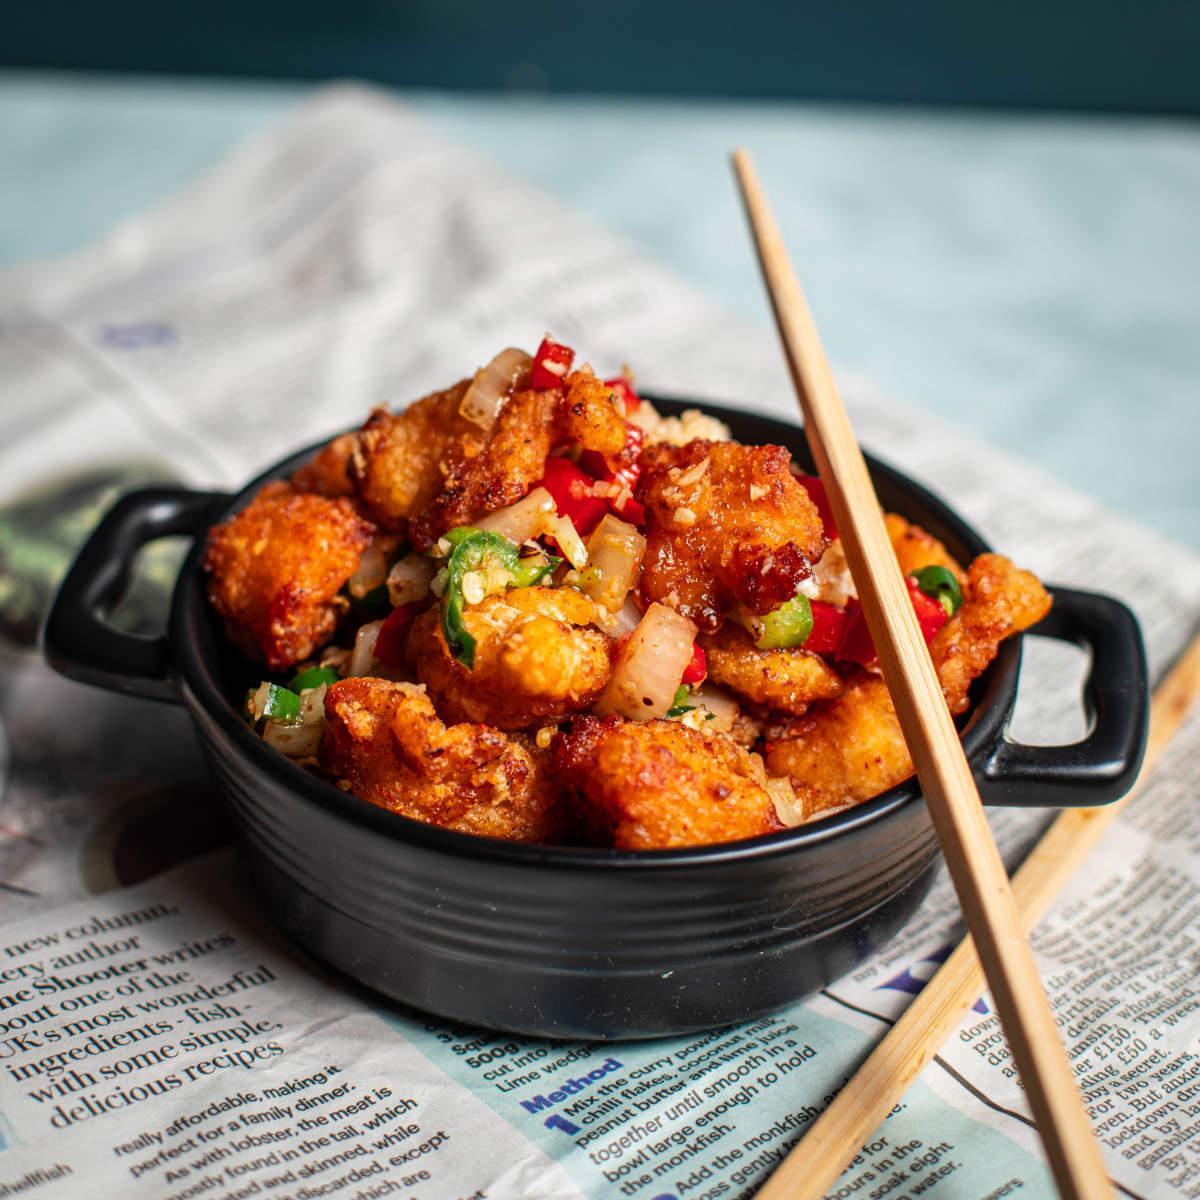 Salt and Chilli Oriental Southside to open